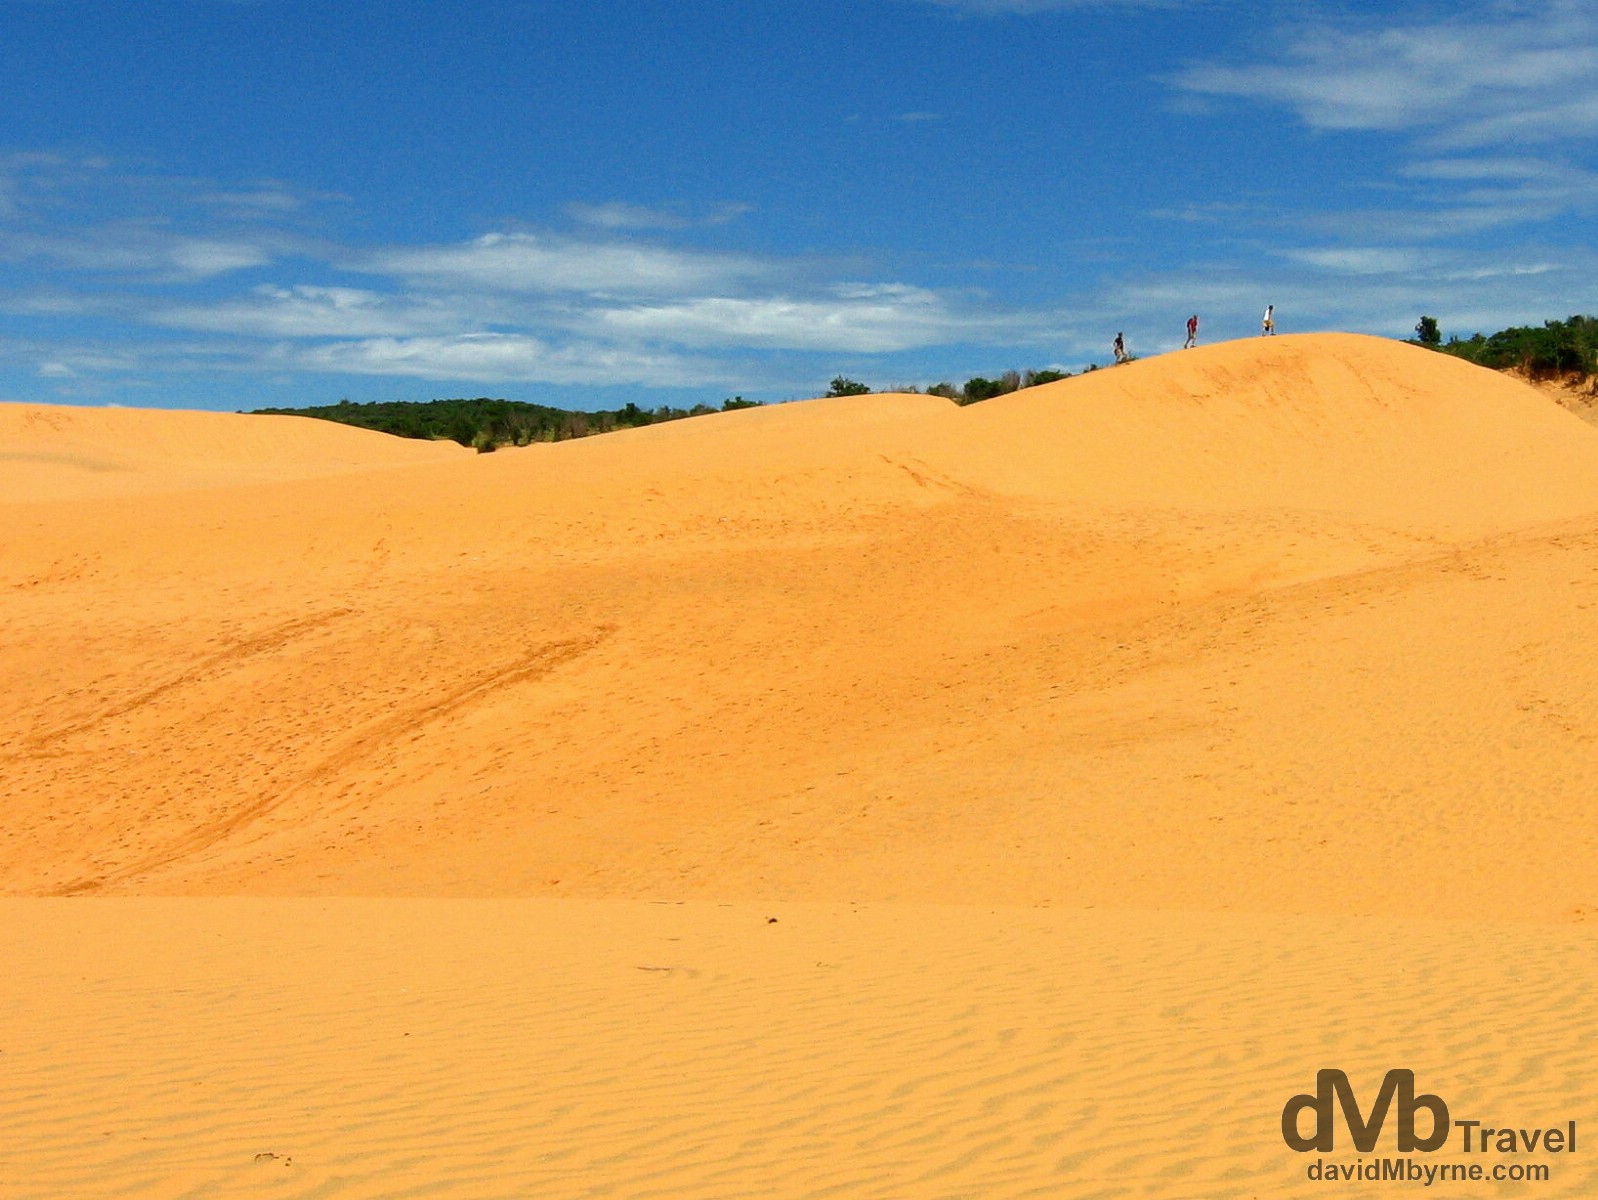 On a section of the massive sand dunes outside the village of Mui Ne, southern Vietnam. September 15th 2005. 